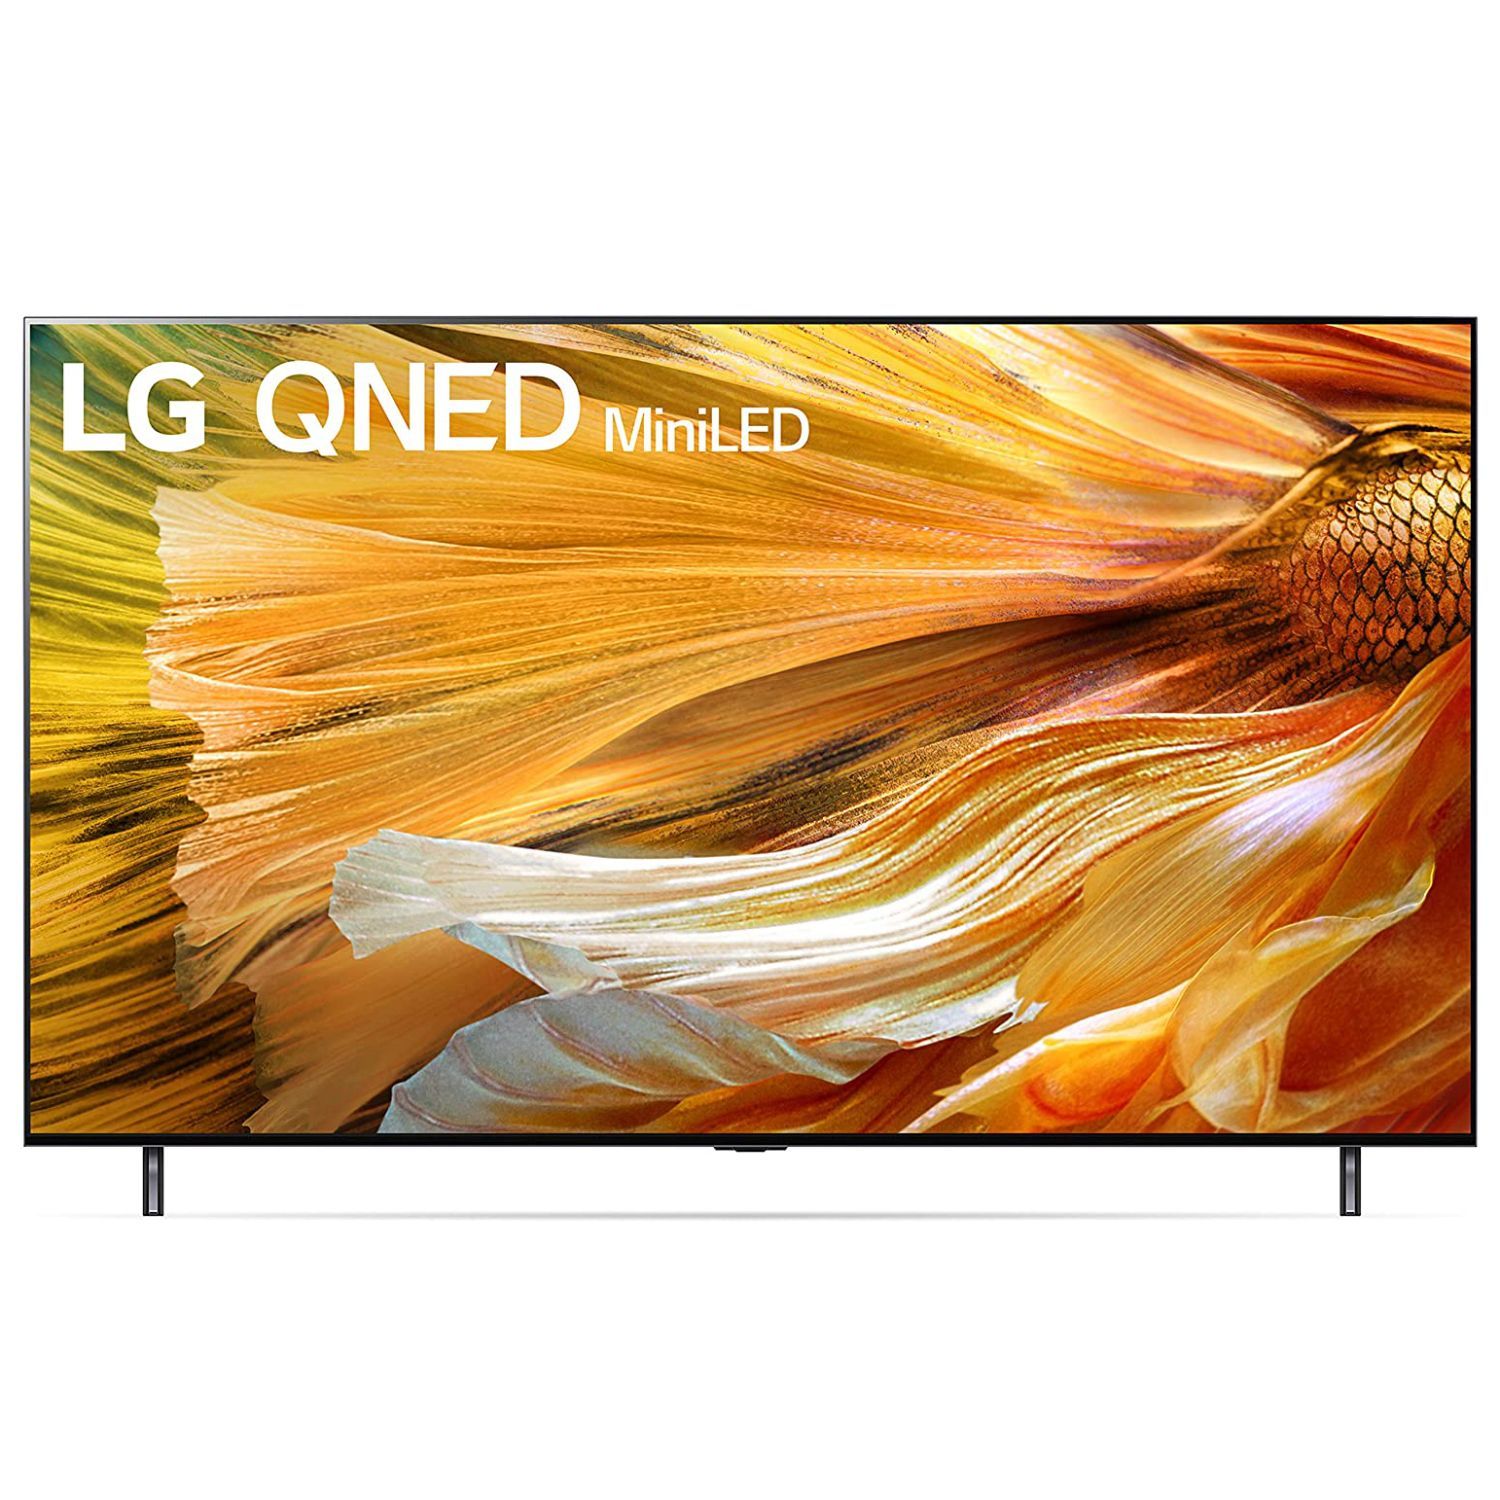 LG QNED 90 Series 4K TV (86-inch)